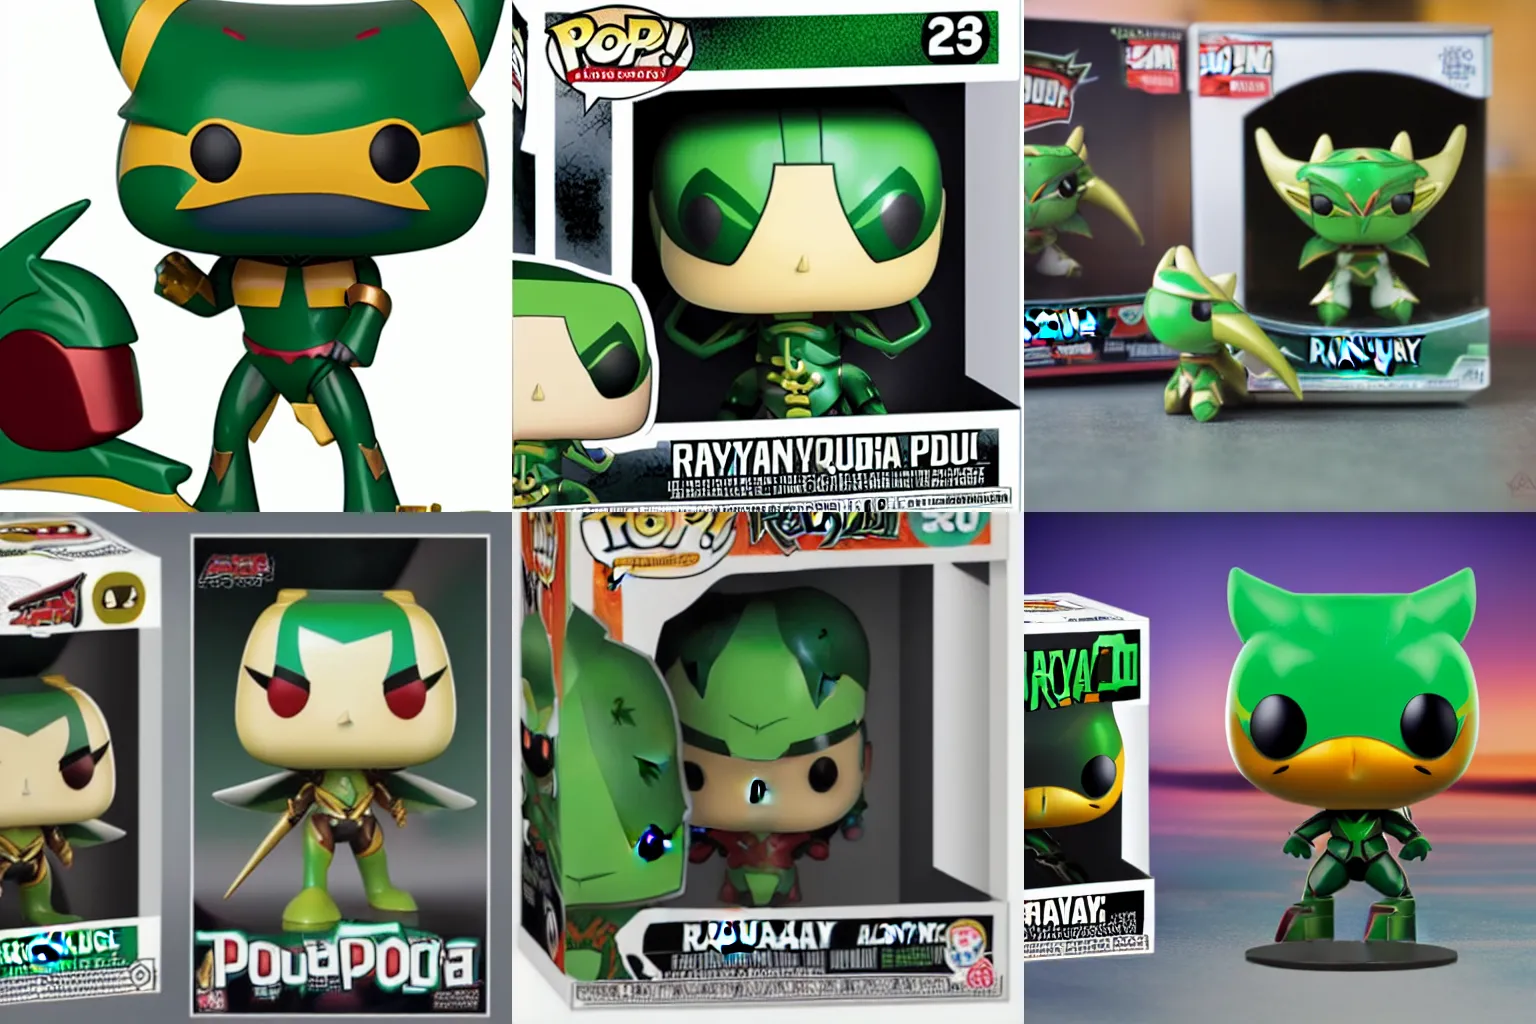 Prompt: Rayquaza Funko Pop, product image from the official website